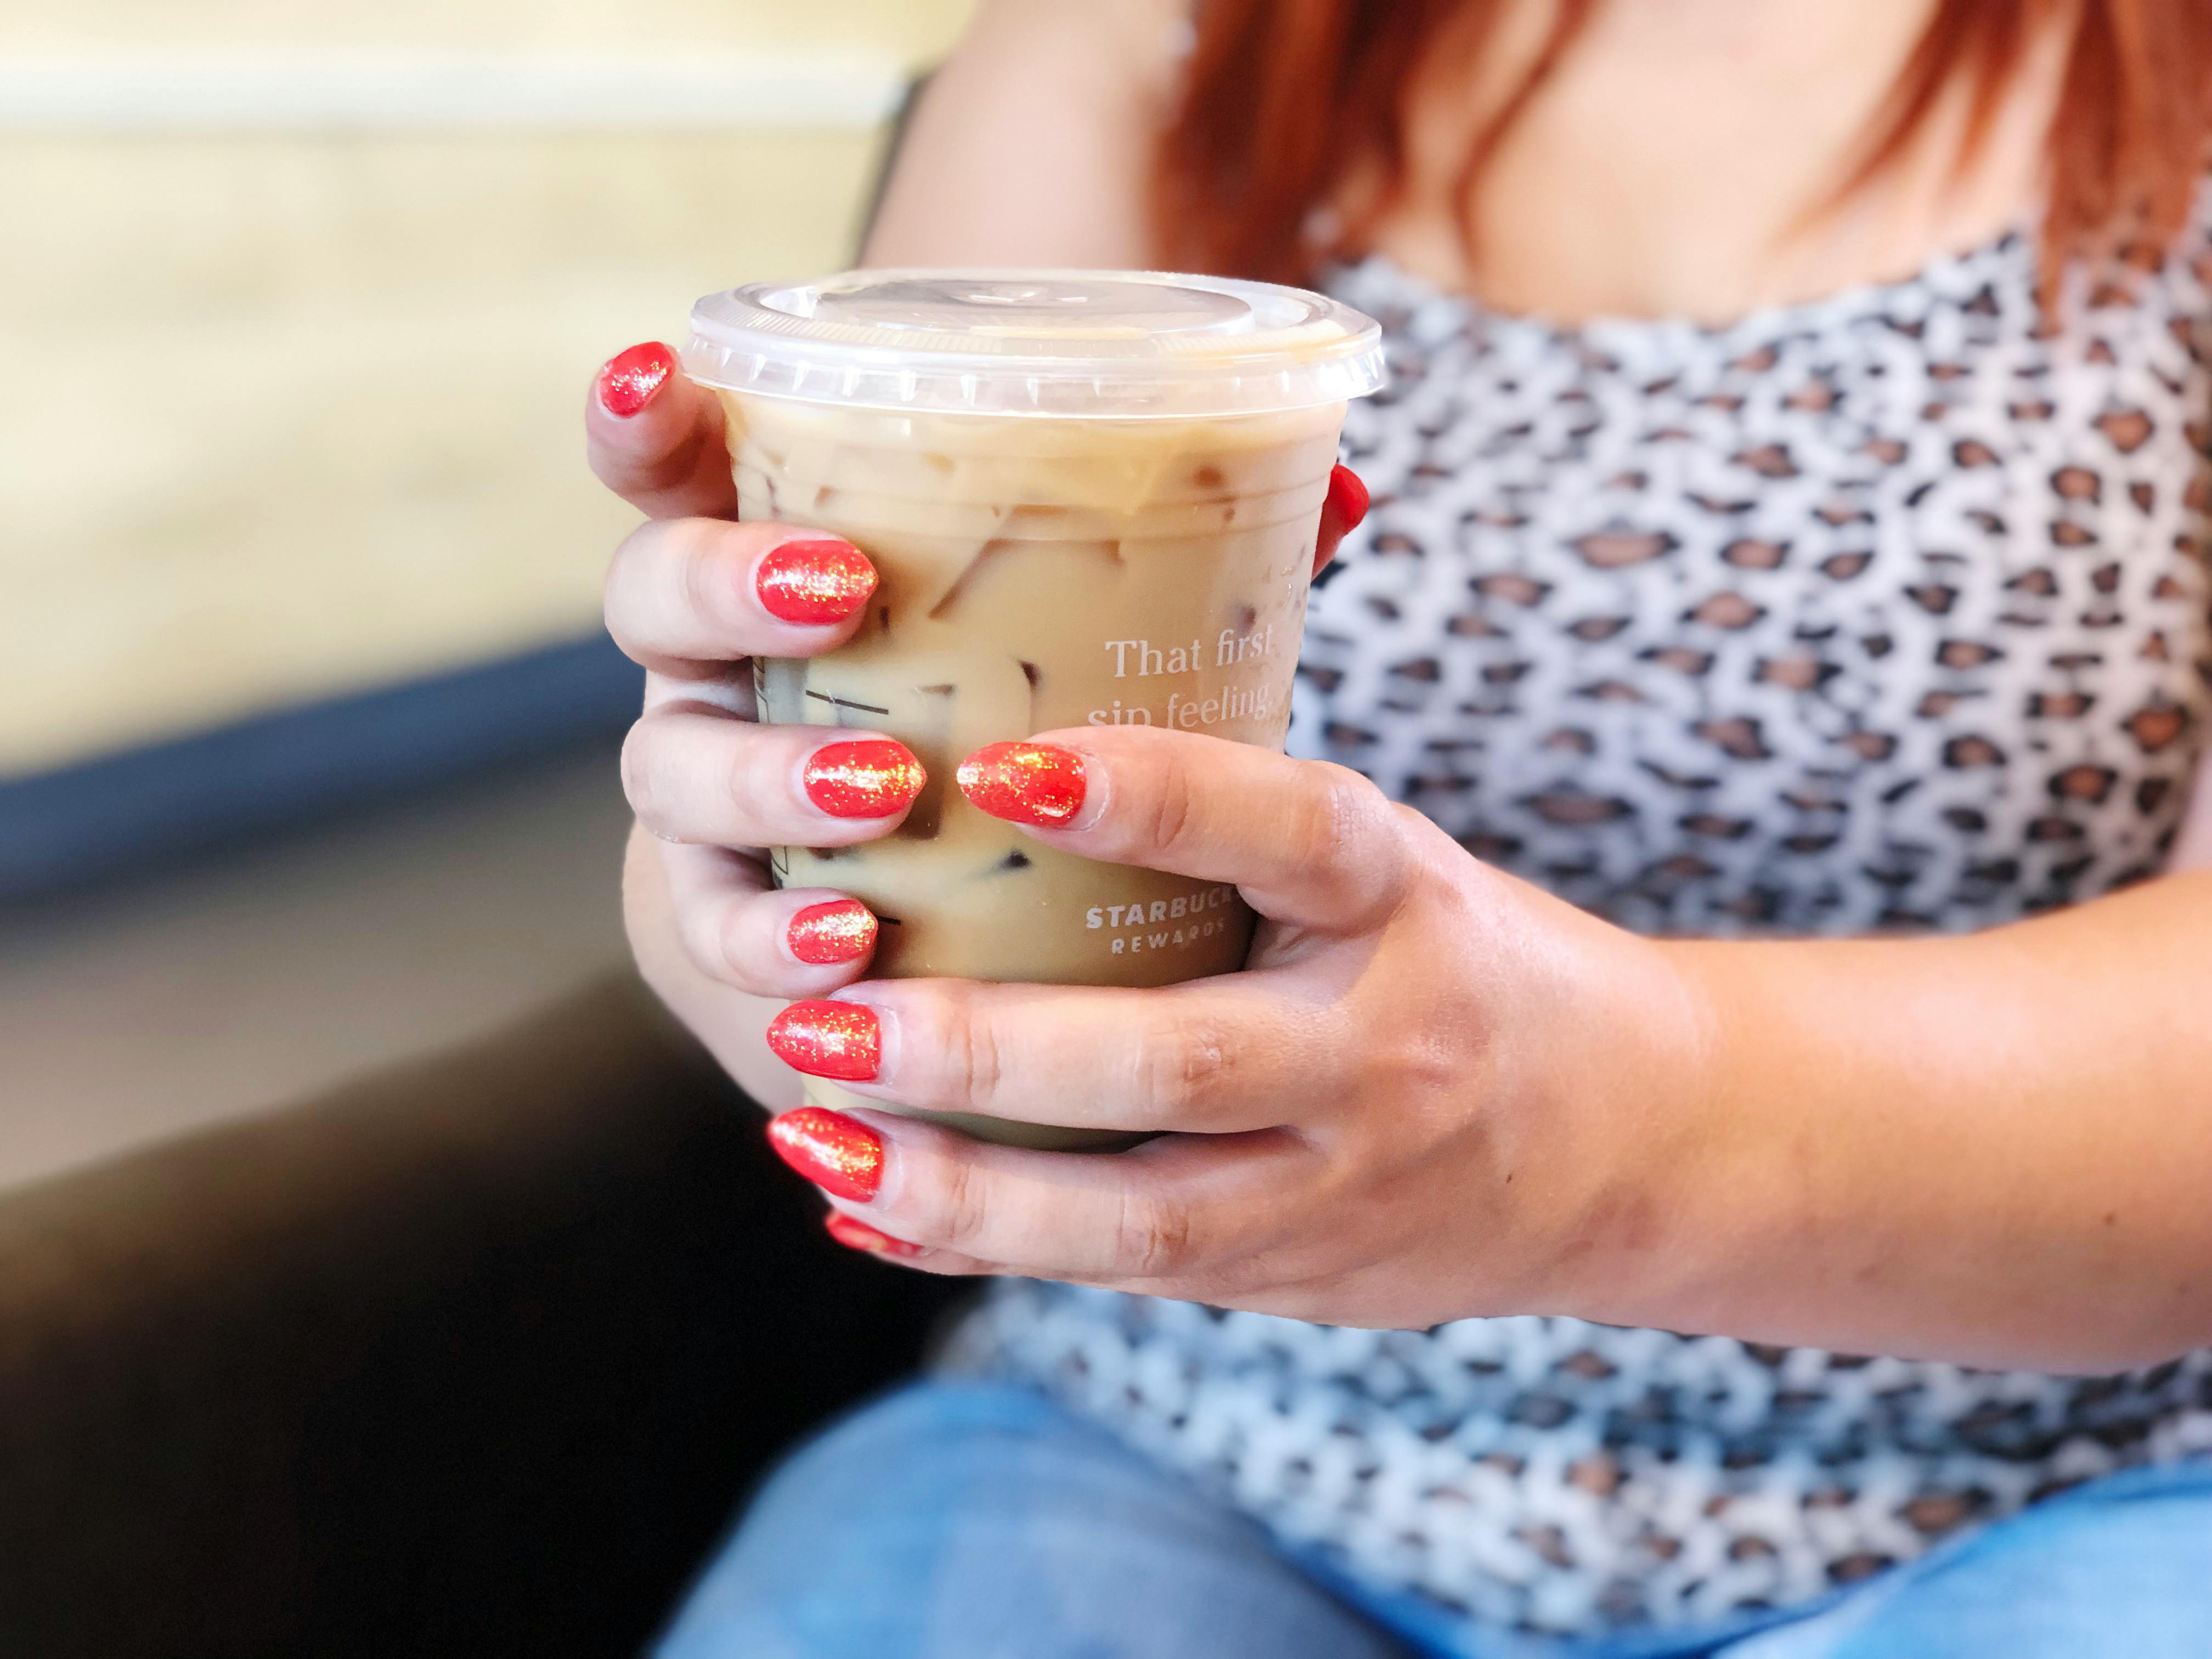 Ask for light ice in your iced coffee and get more bang for your buck.